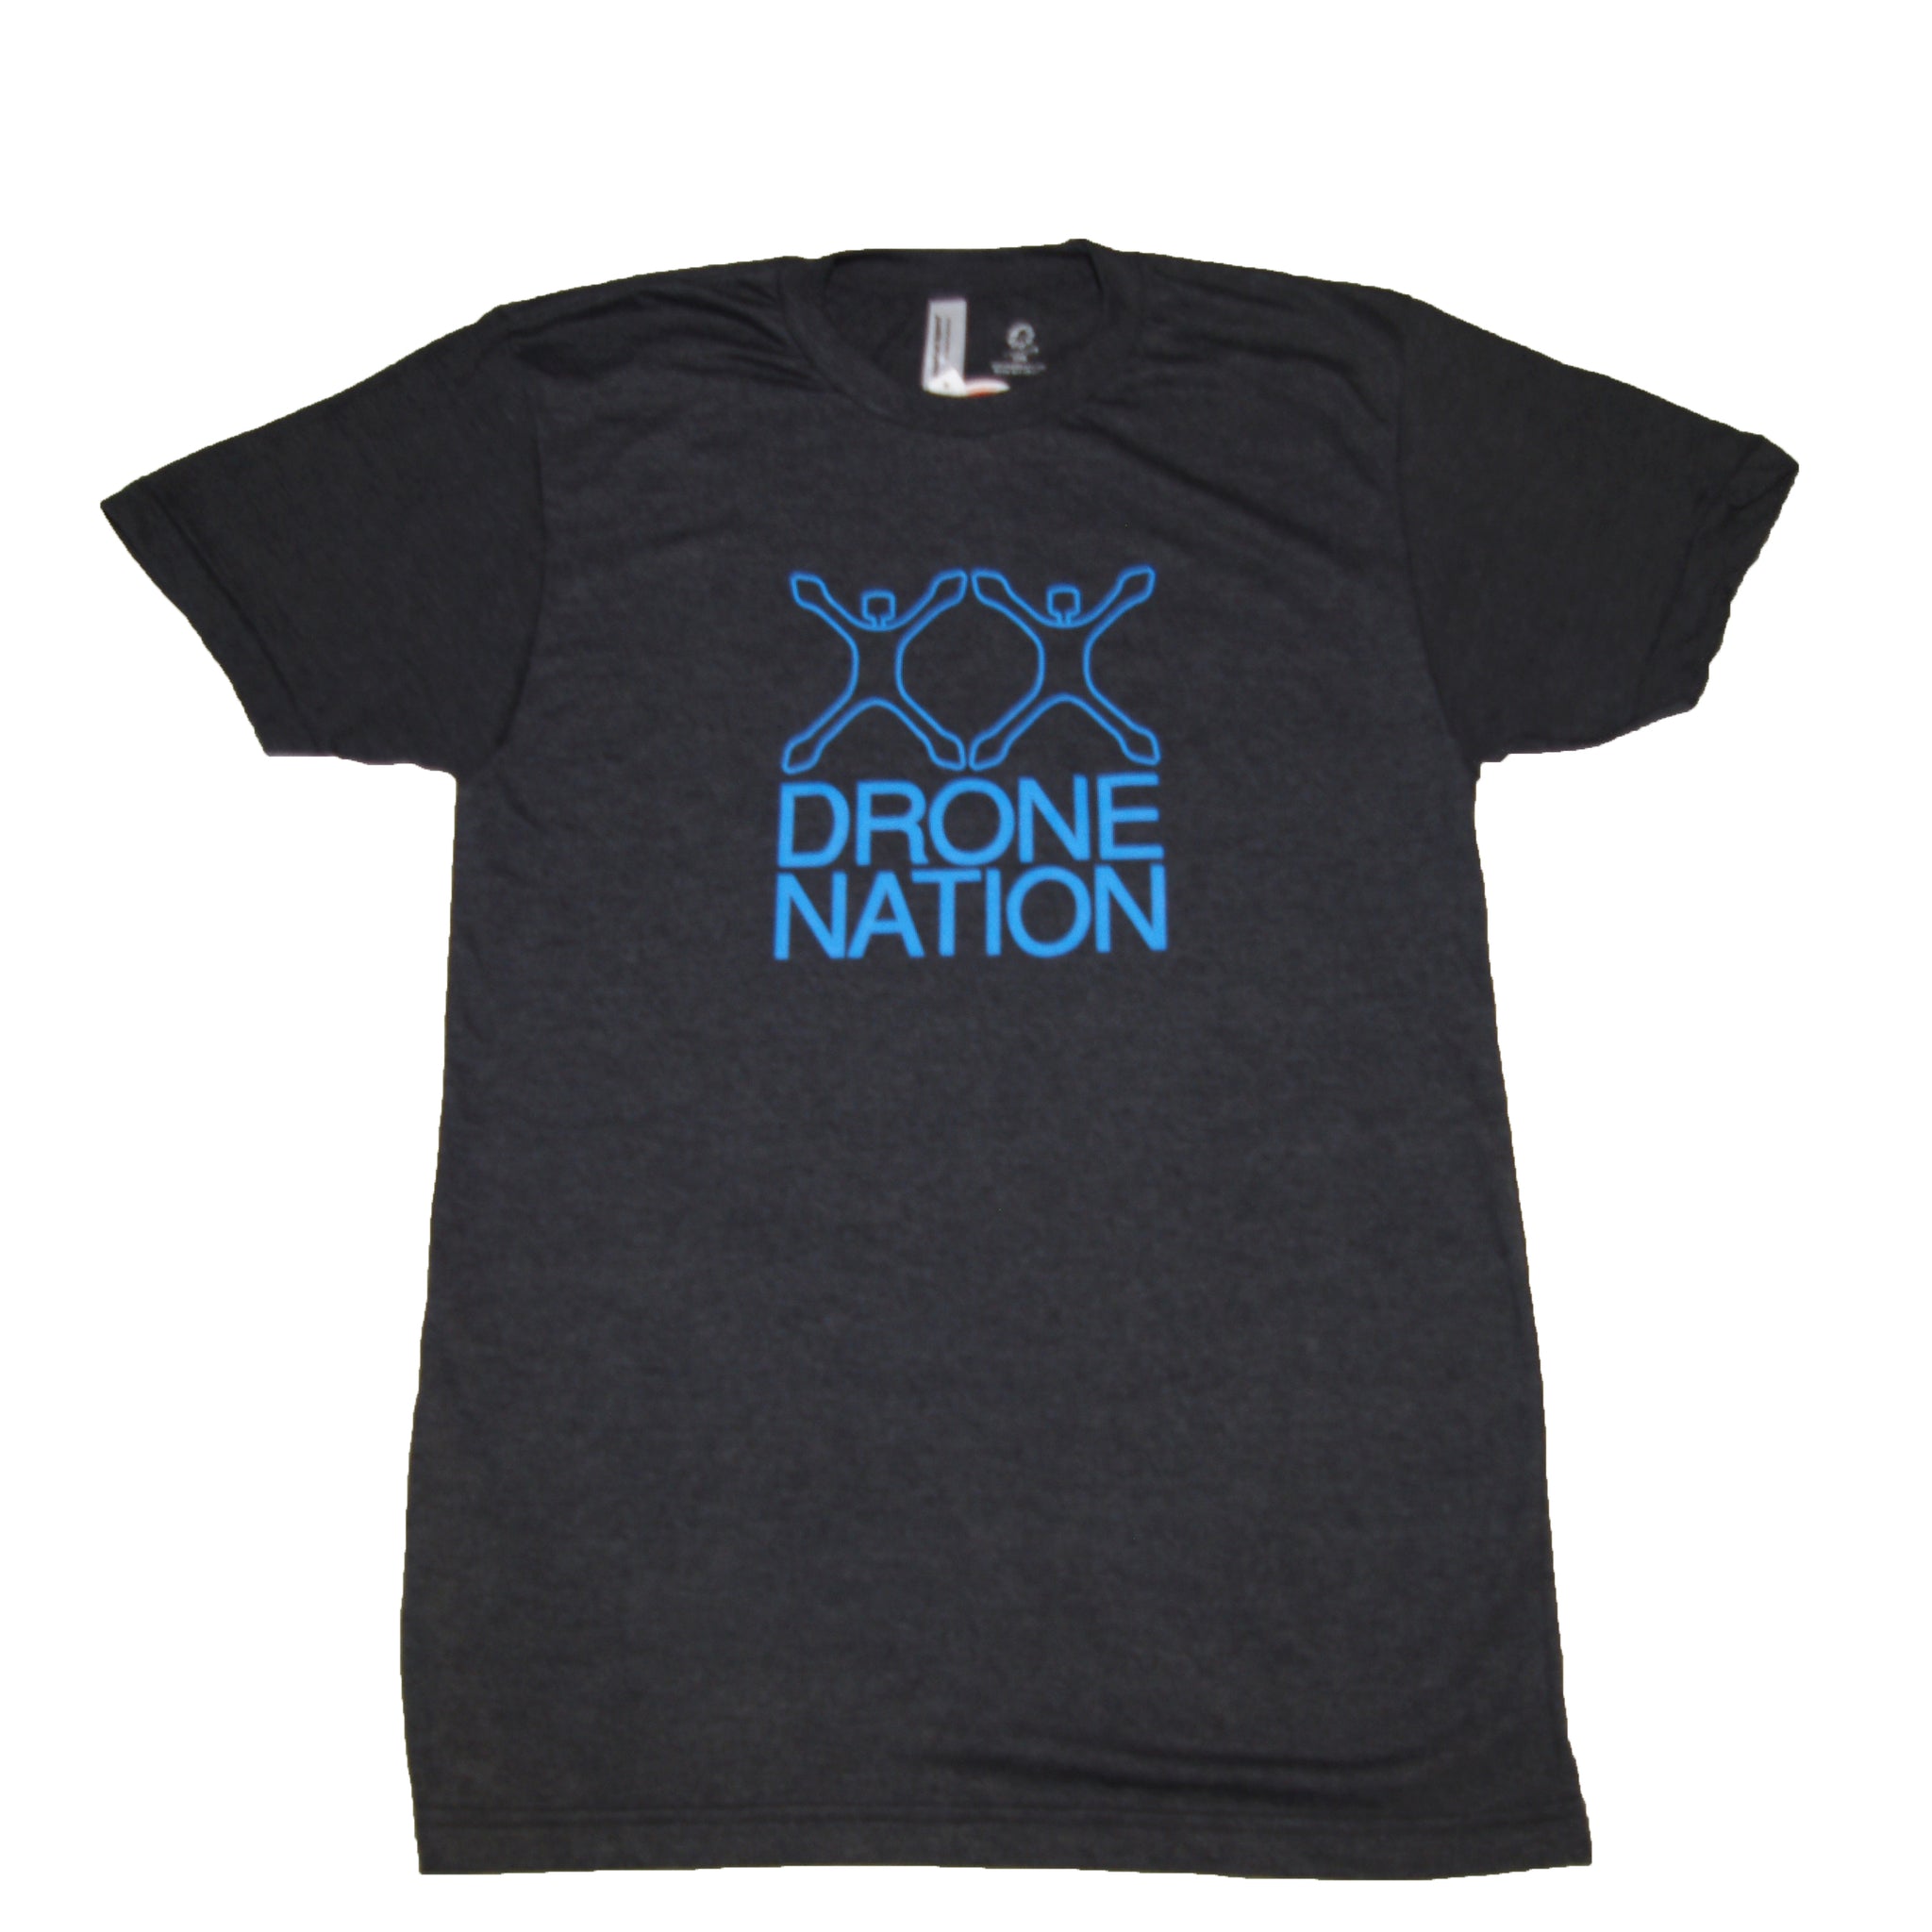 Drone Nation Get Out and Fly T-Shirt Dark